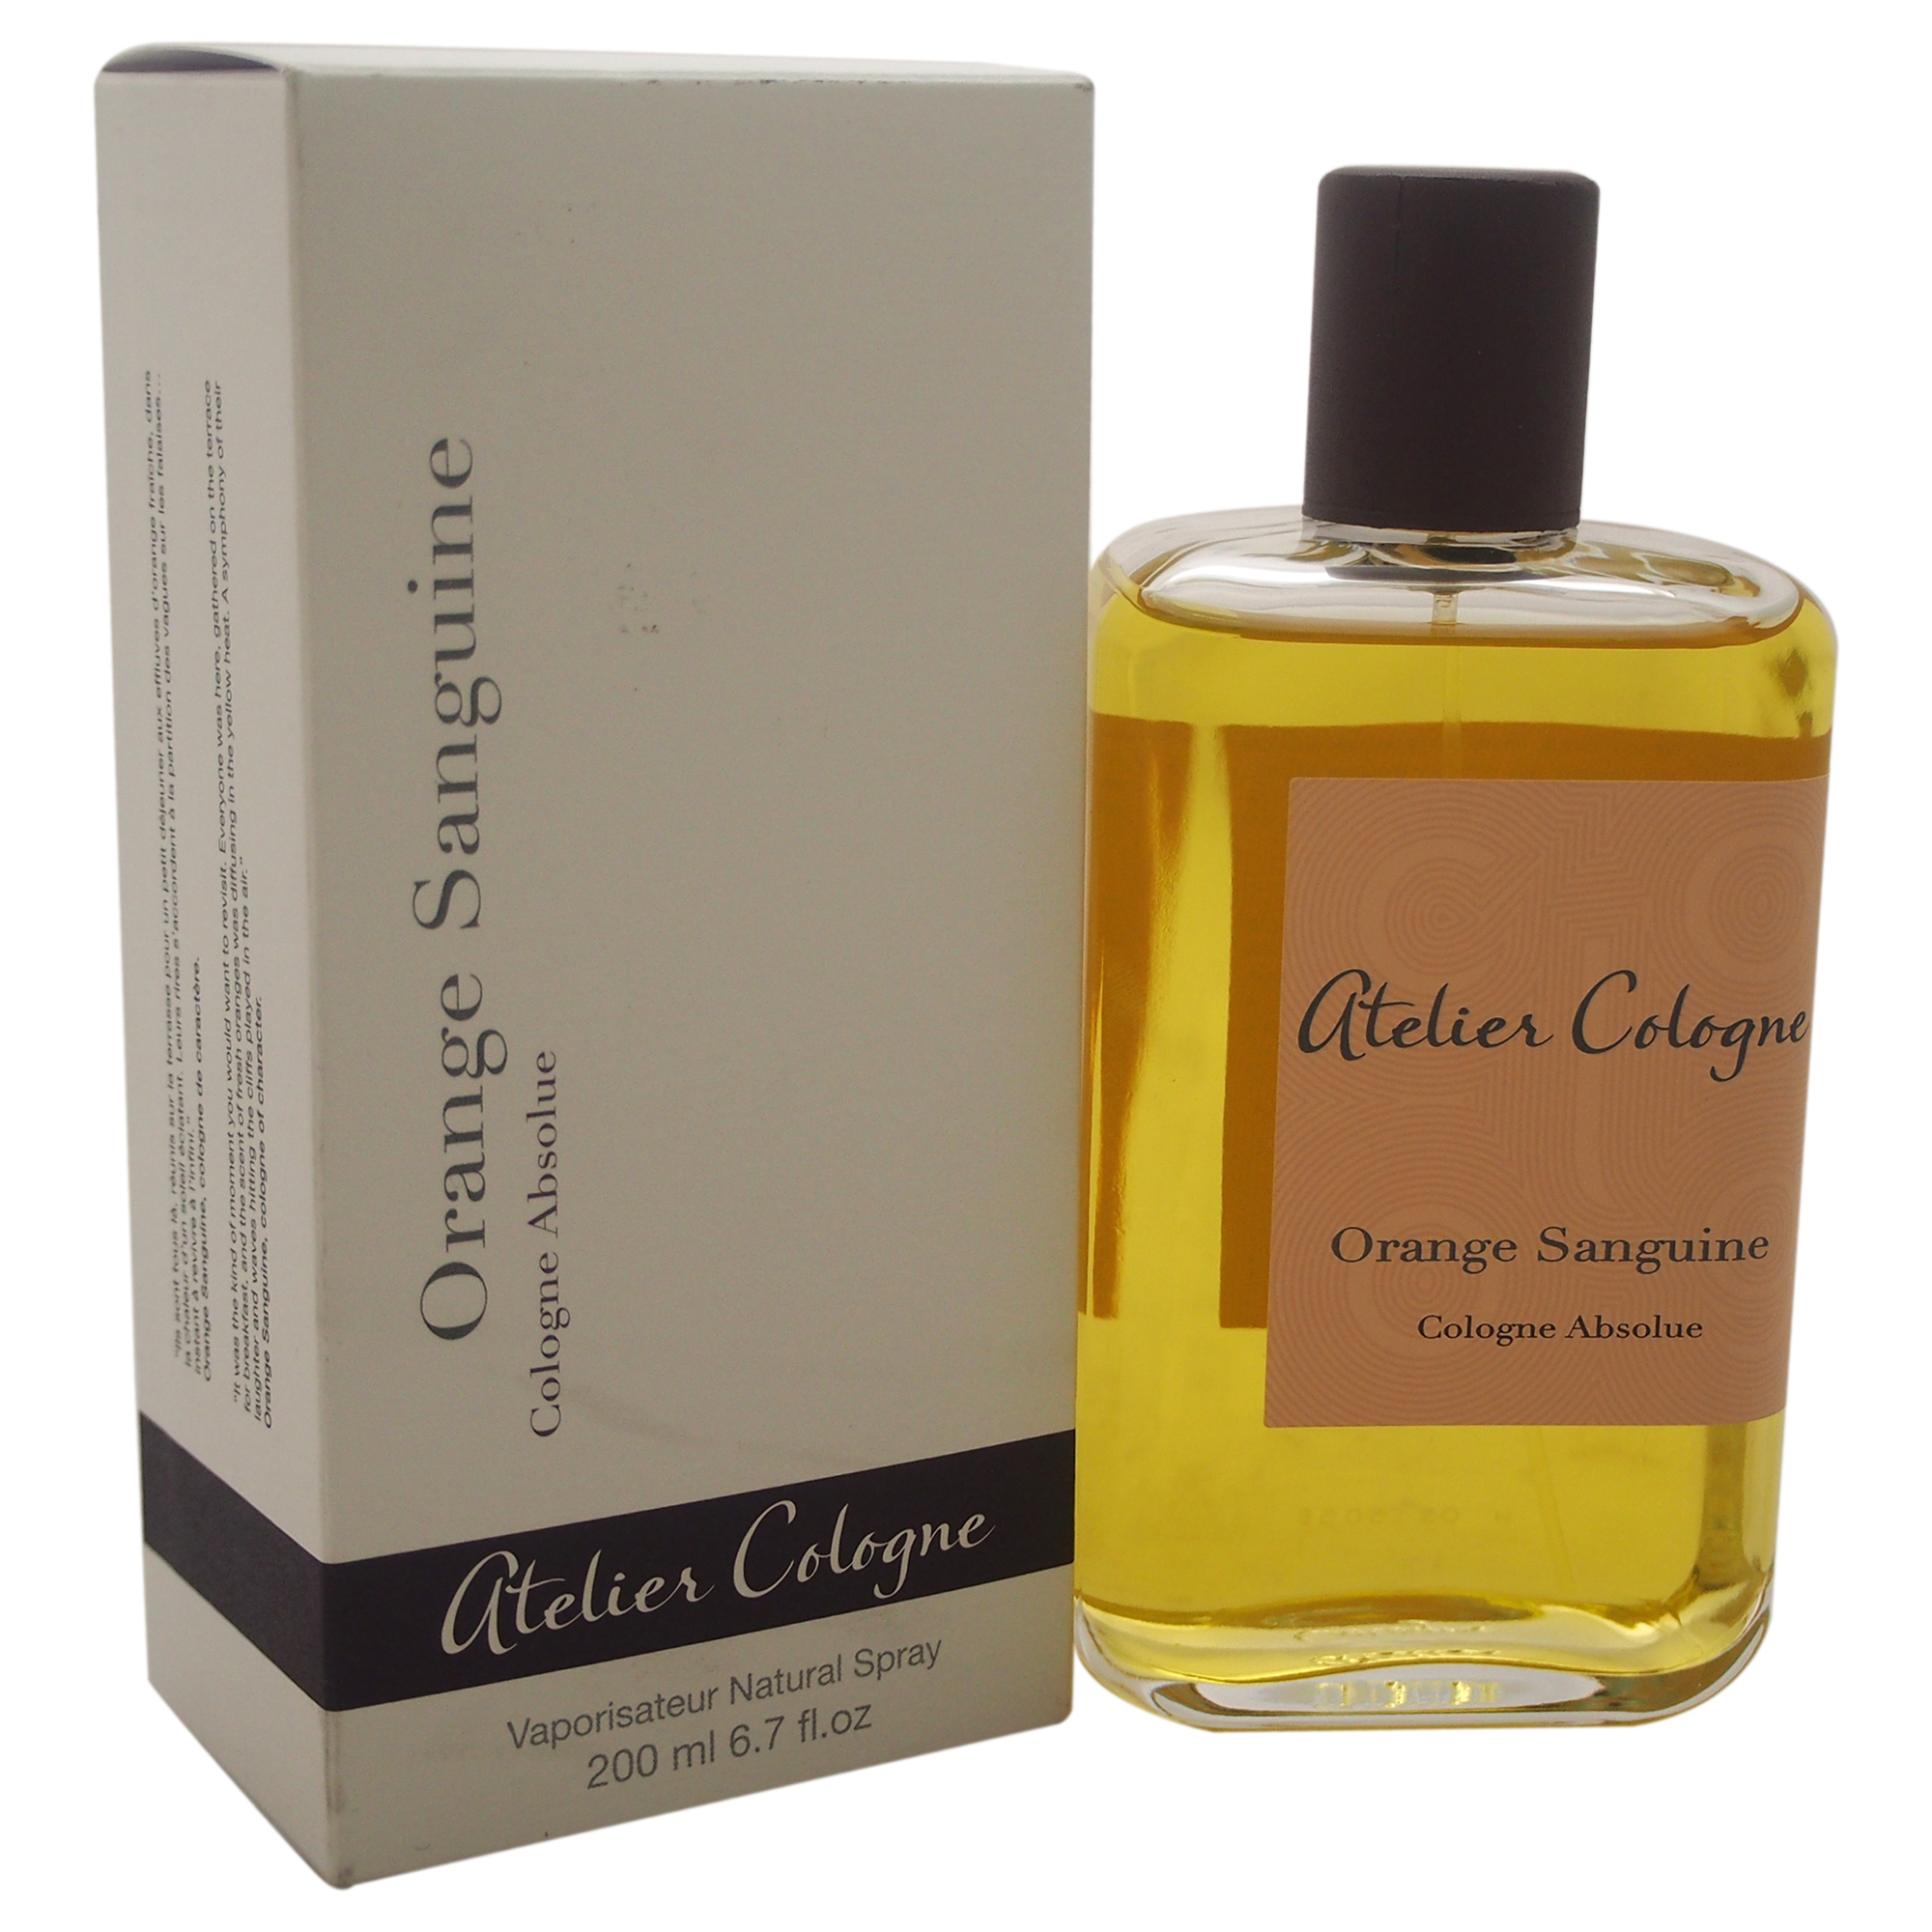 Orange Sanguine by Atelier Cologne for Unisex - 6.7 oz Cologne Absolue Spray